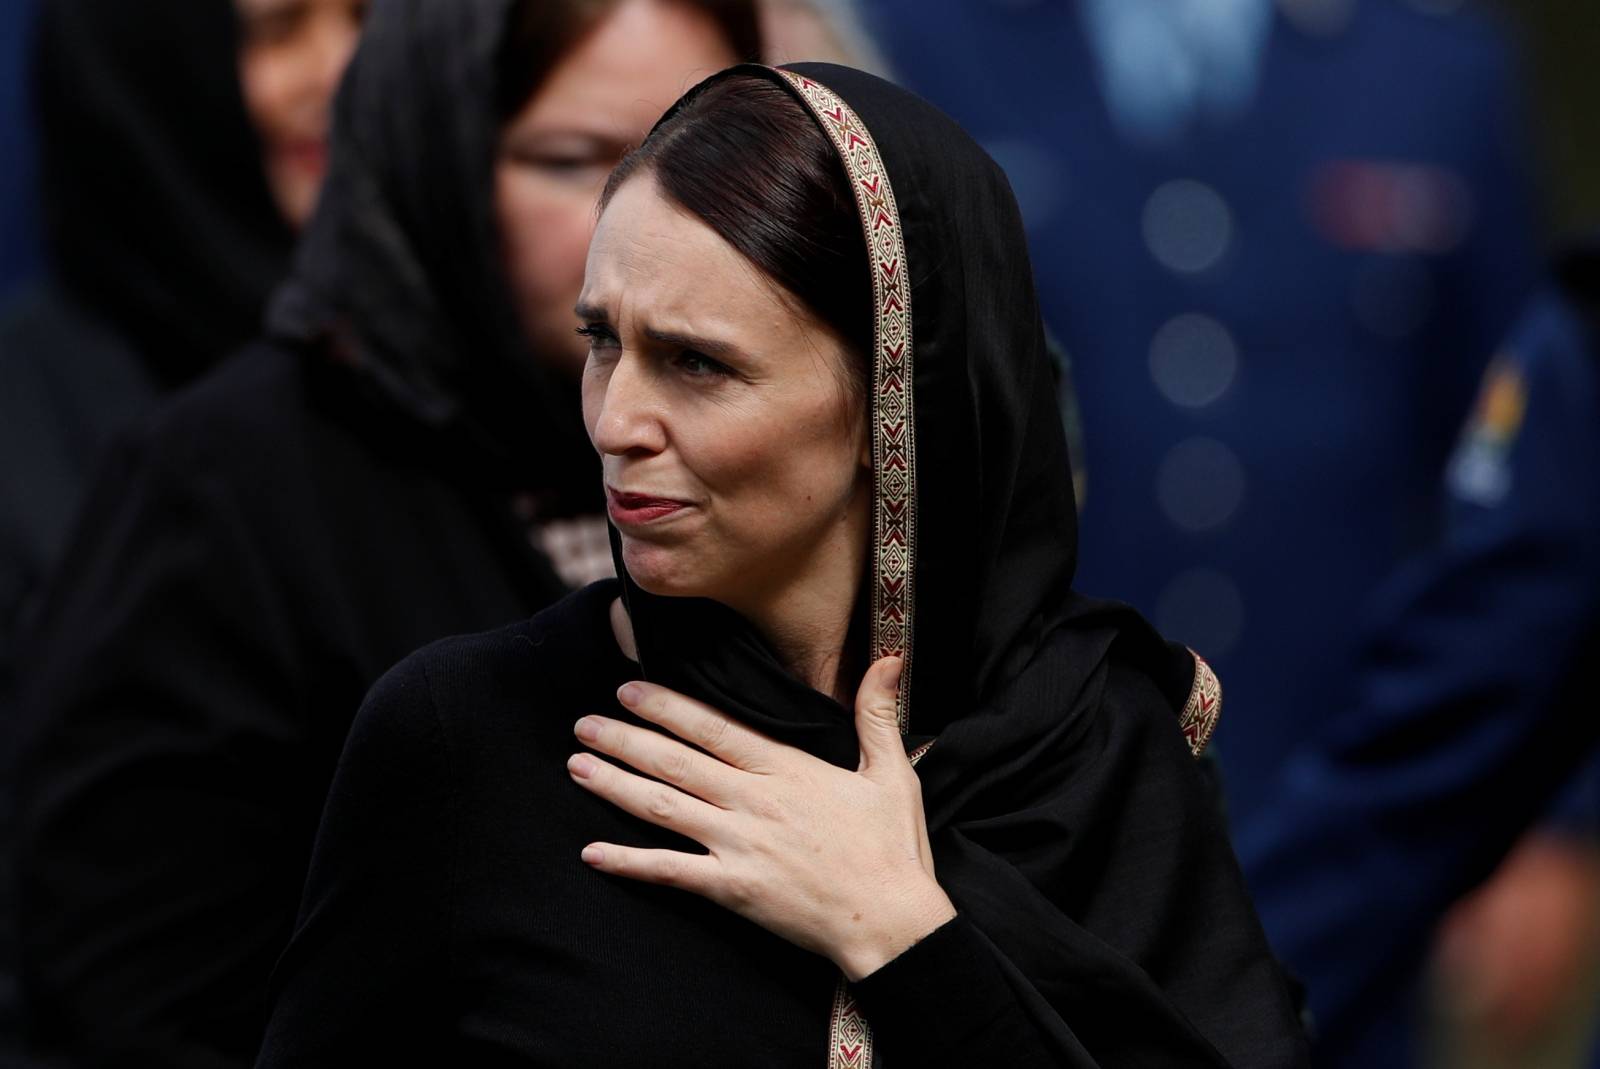 New Zealand's Prime Minister Jacinda Ardern leaves after the Friday prayers at Hagley Park outside Al-Noor mosque in Christchurch